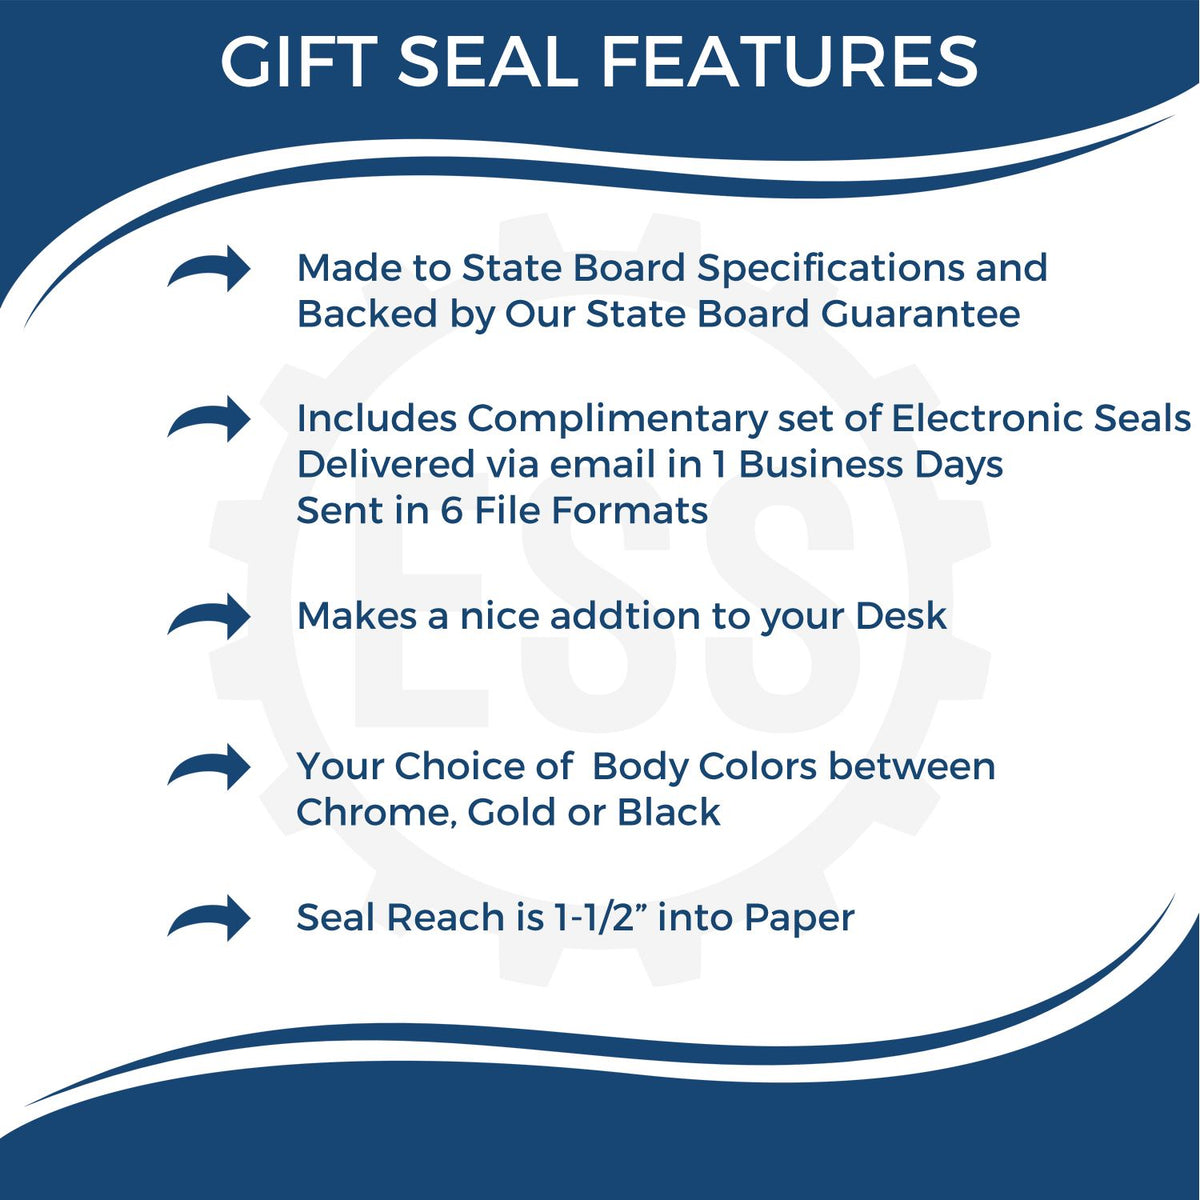 A picture of an infographic highlighting the selling points for the Gift Delaware Engineer Seal